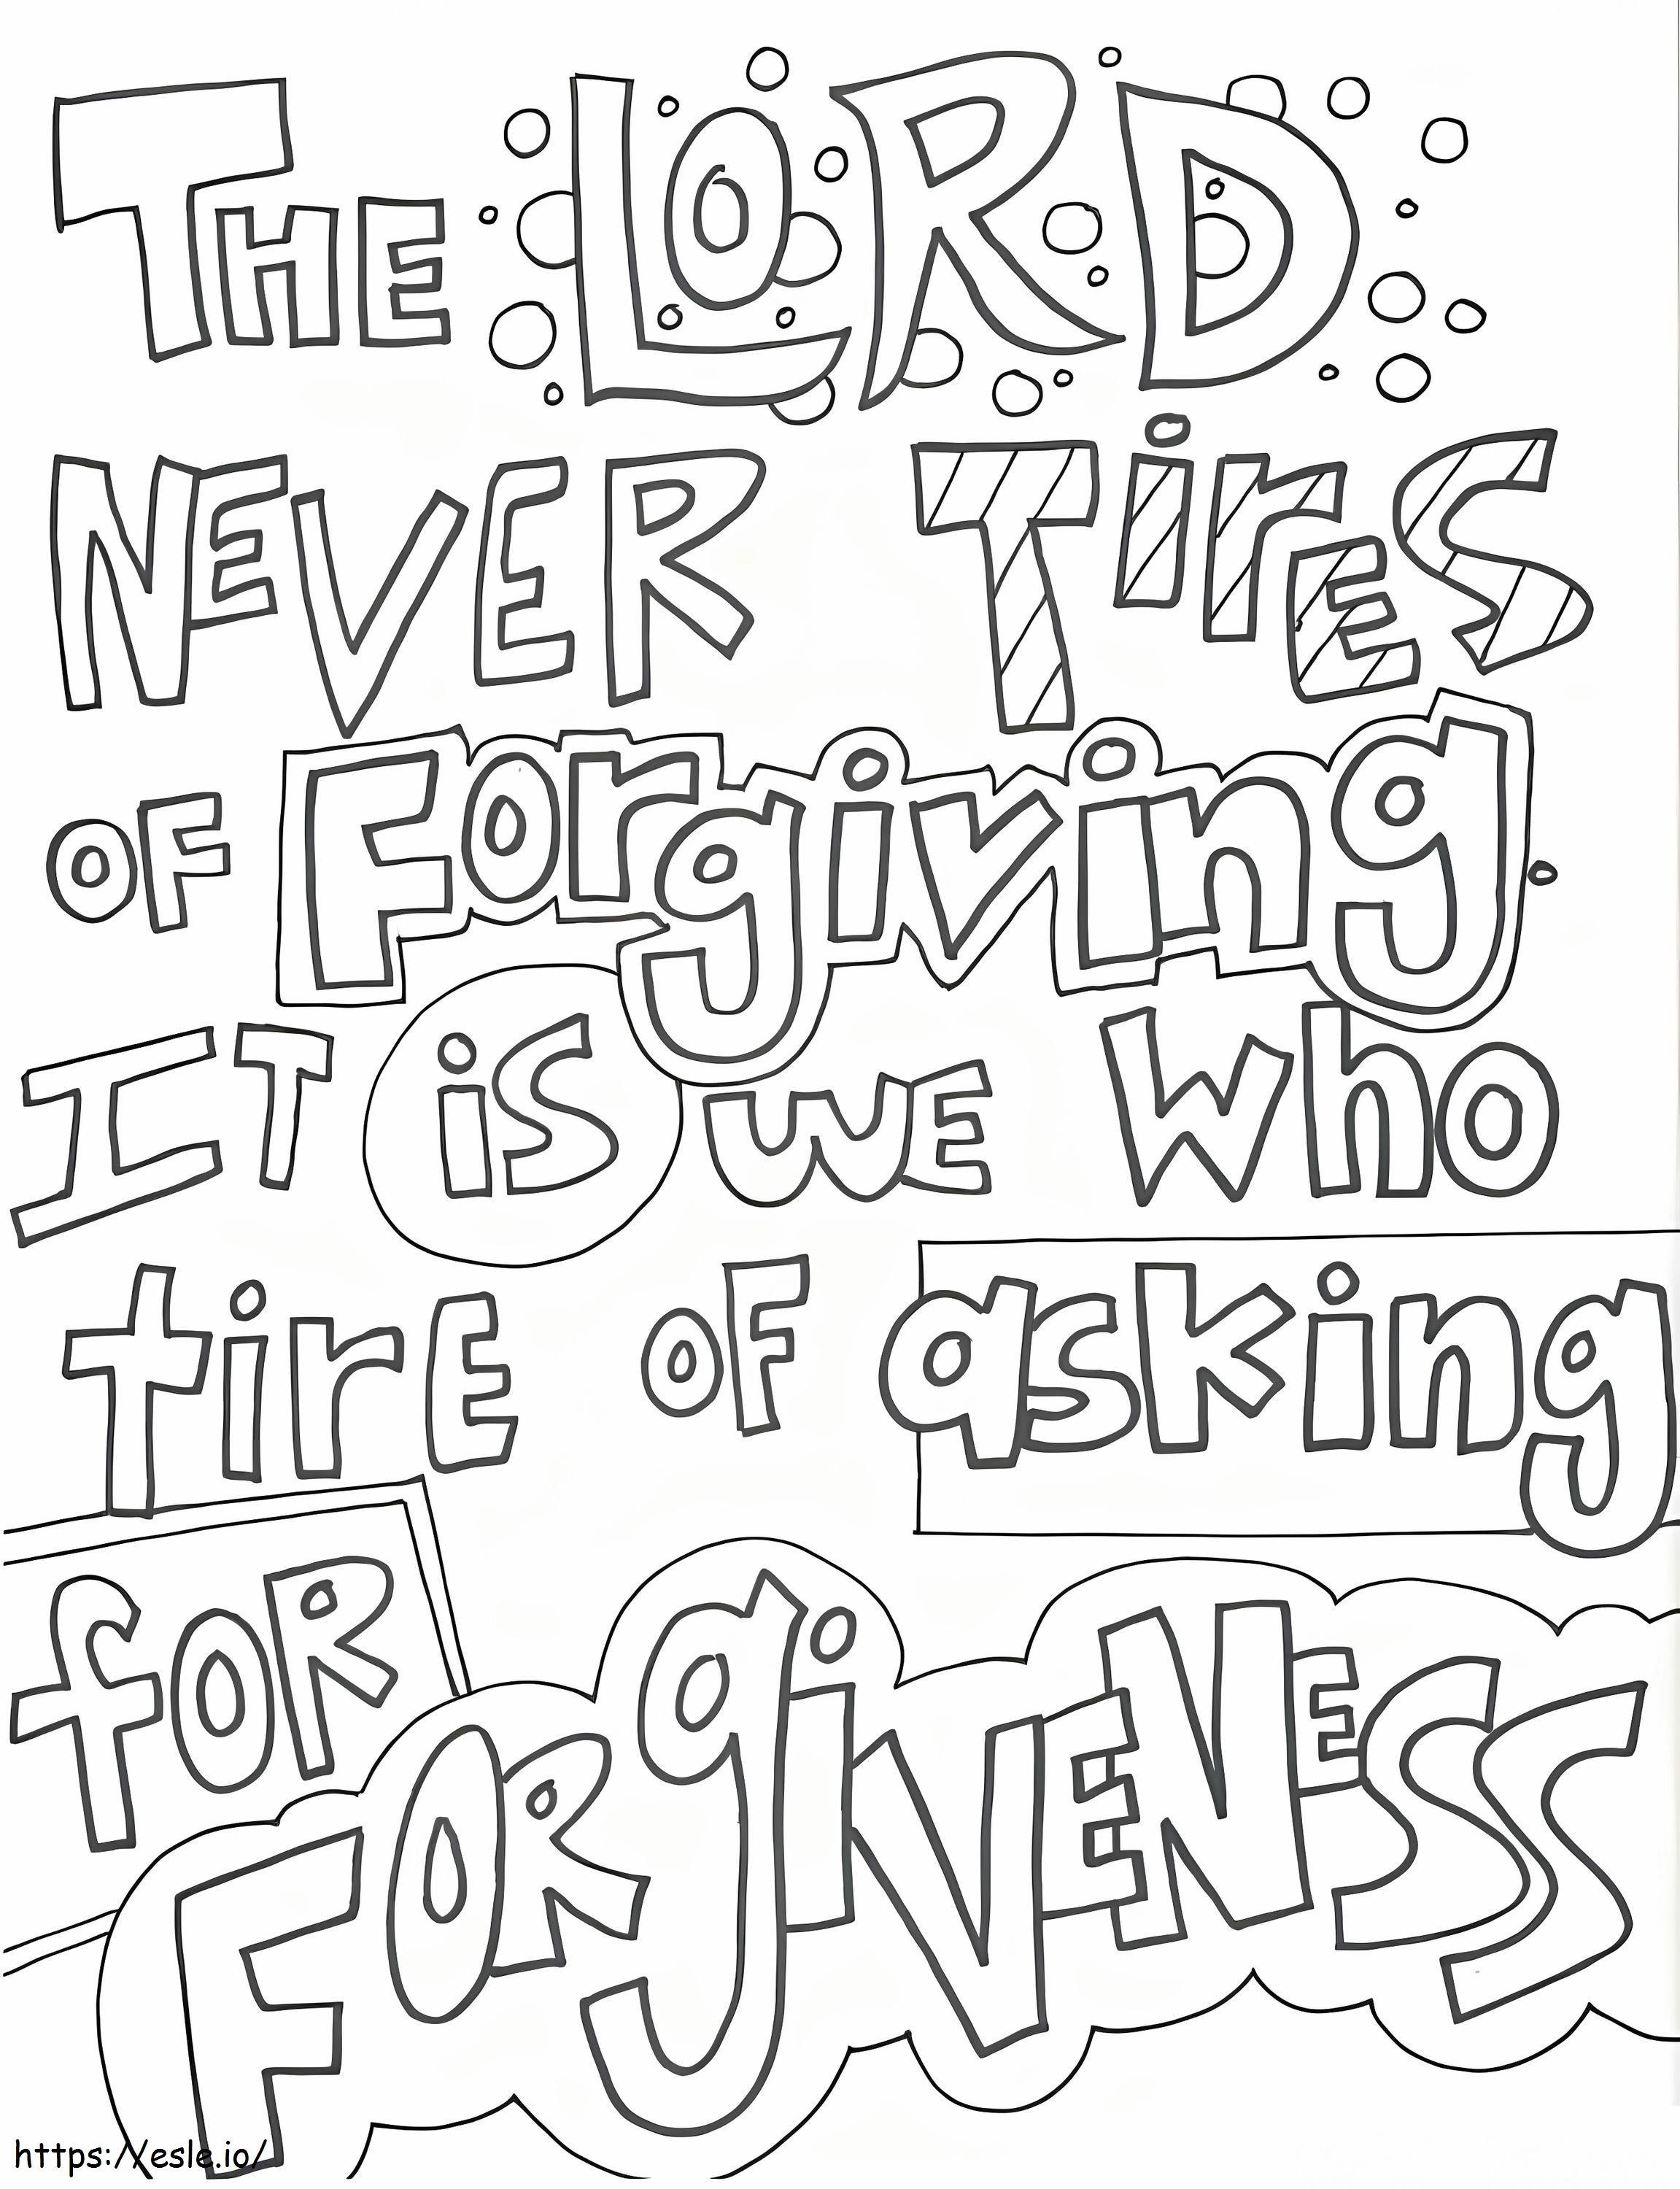 Forgiveness Doodle coloring page